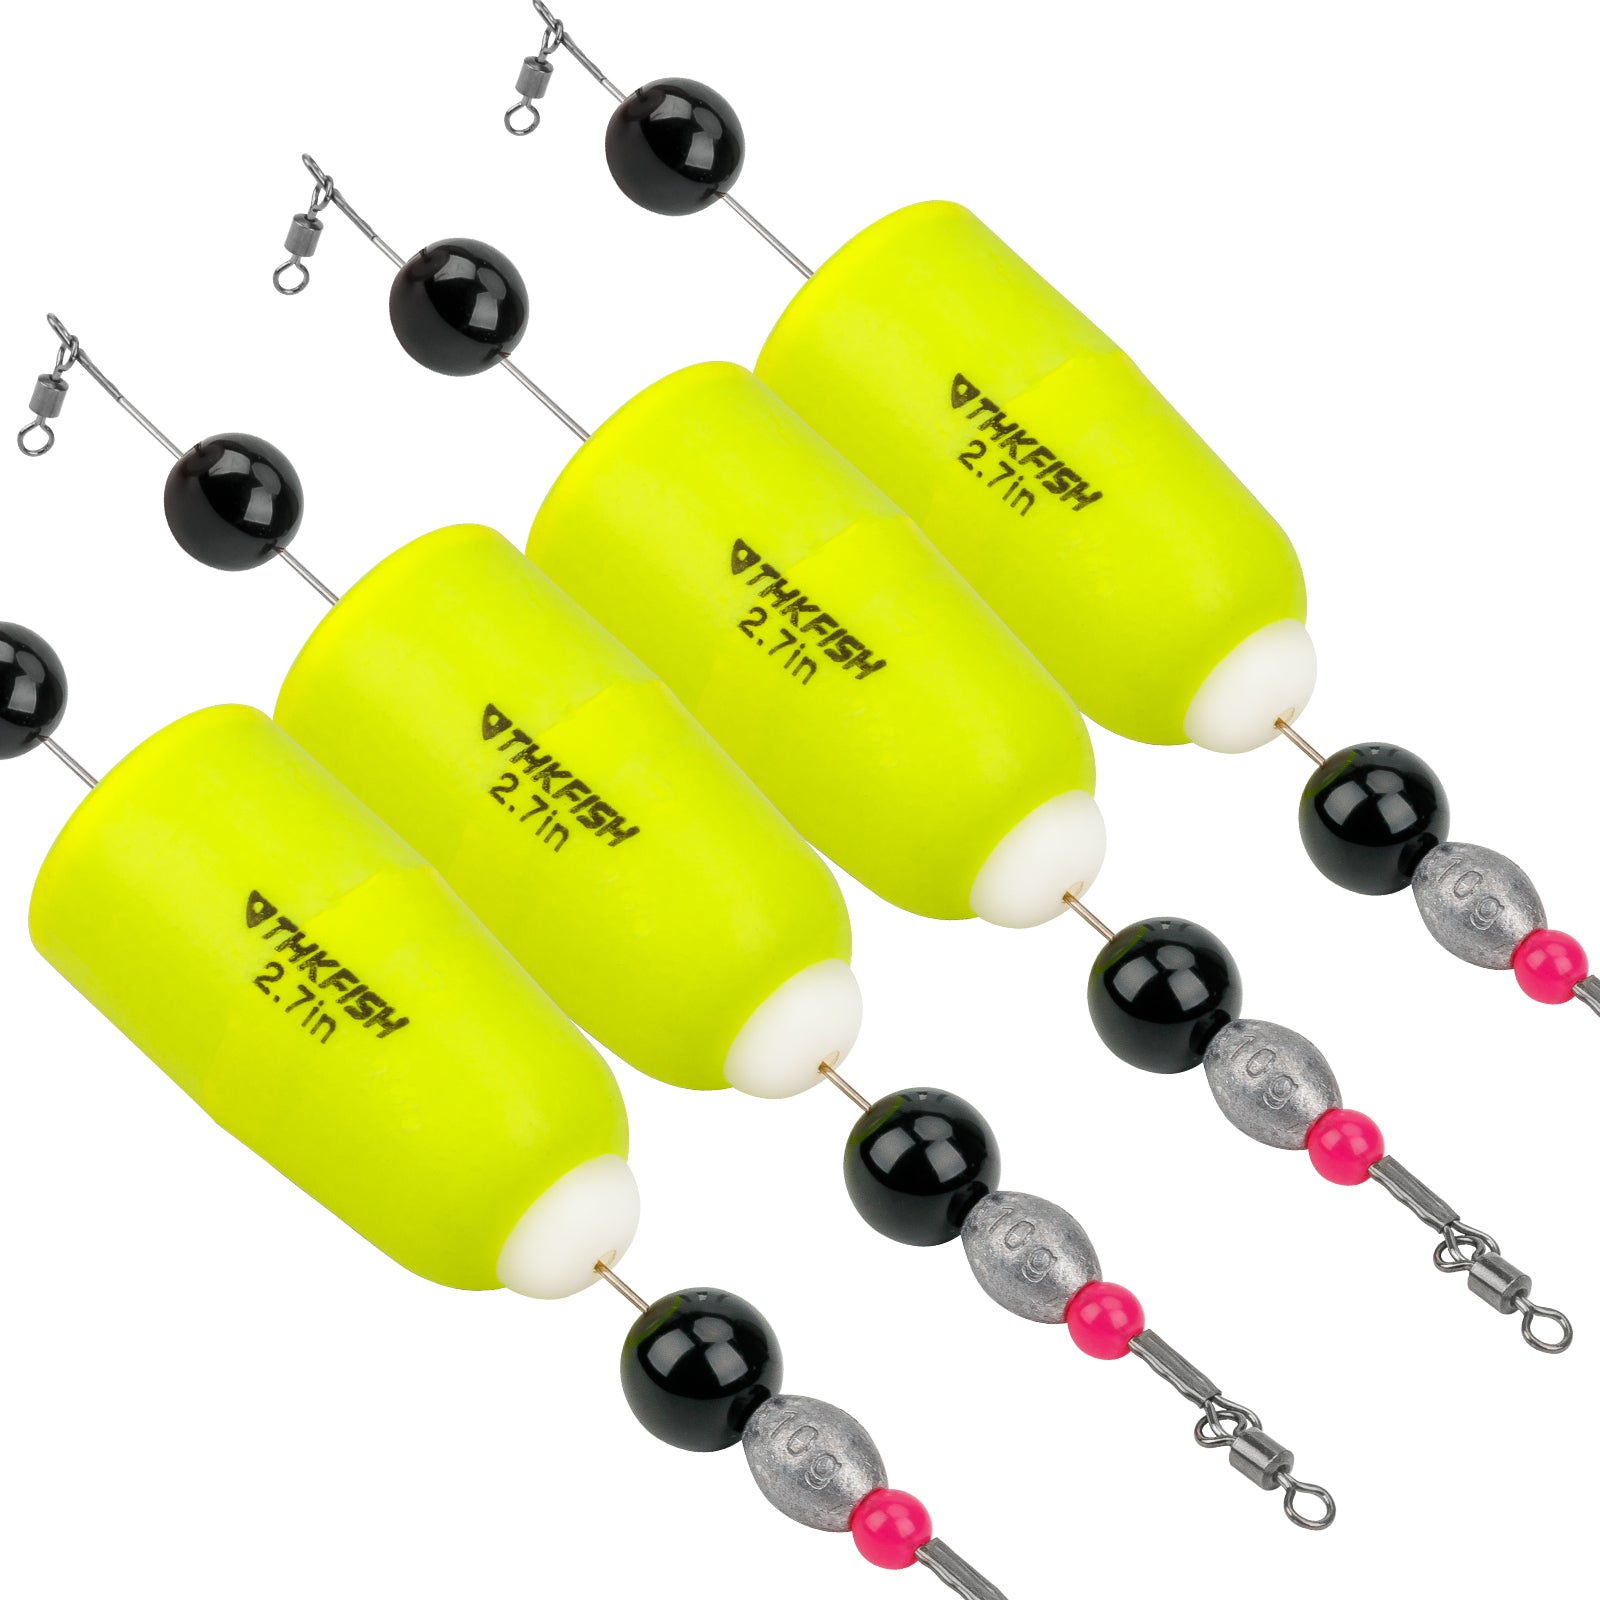 THKFISH 4PCS Weighted Fishing Bobbers Popping Floats Rig